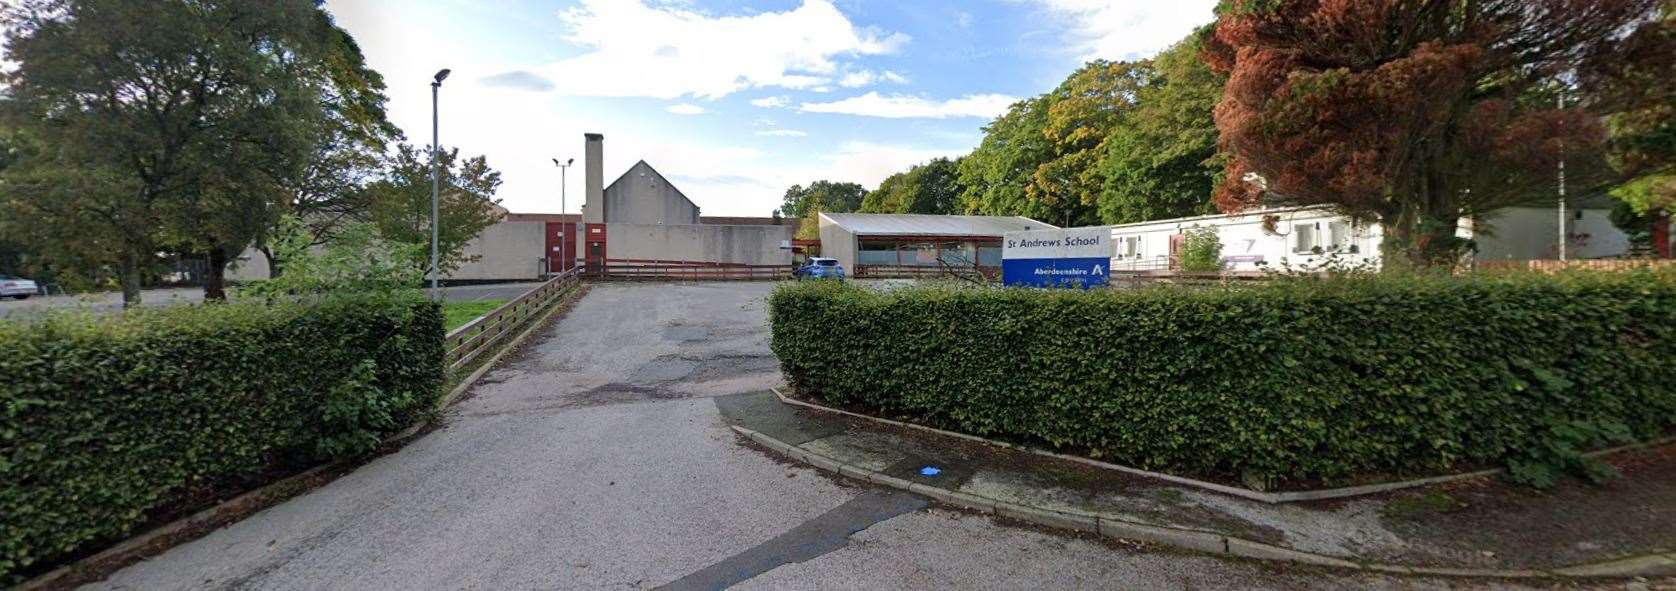 The former St Andrew’s School in Inverurie could be demolished later this year.